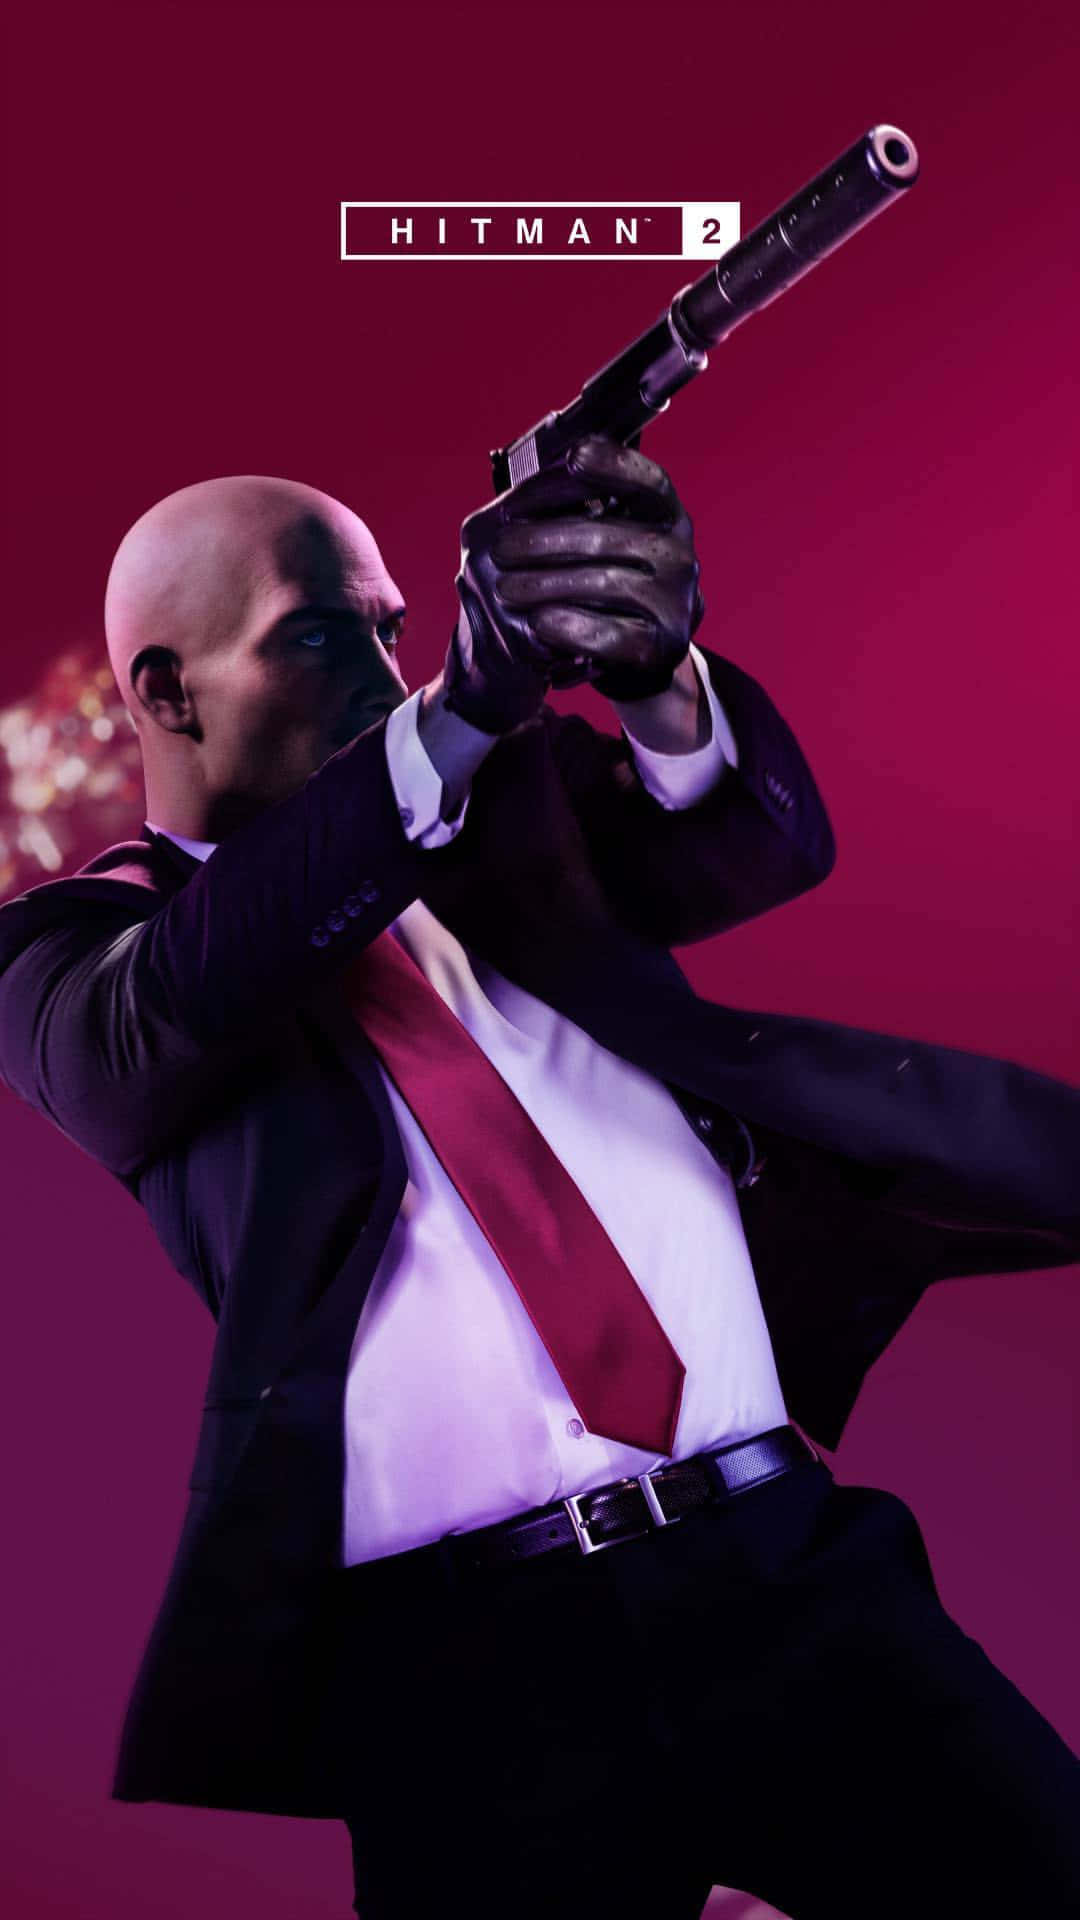 Agent 47 returns in the highly anticipated sequel, Best Hitman 2